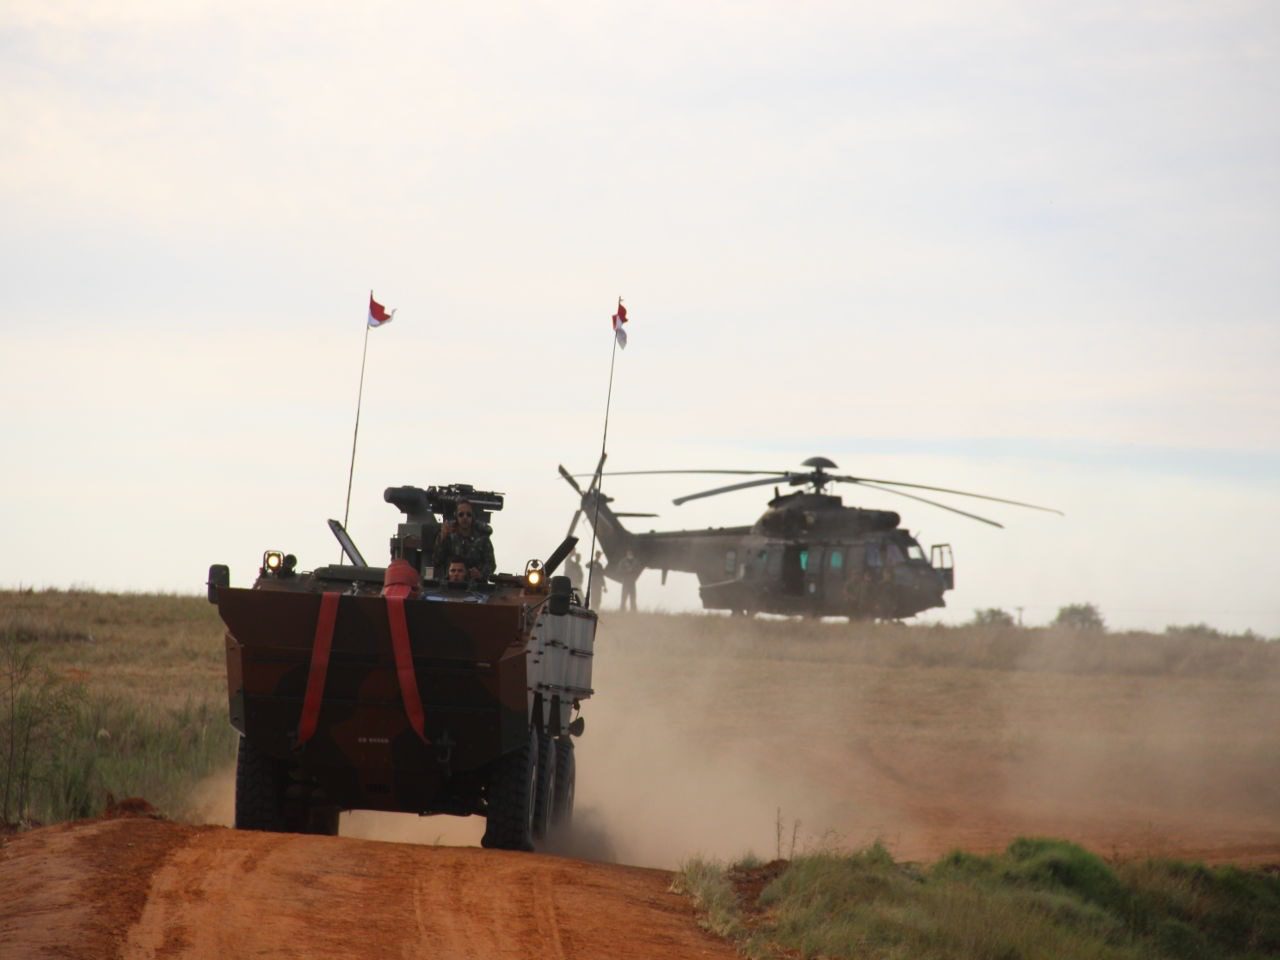 International exercises show the Brazilian Army's operational and collaborative capacity